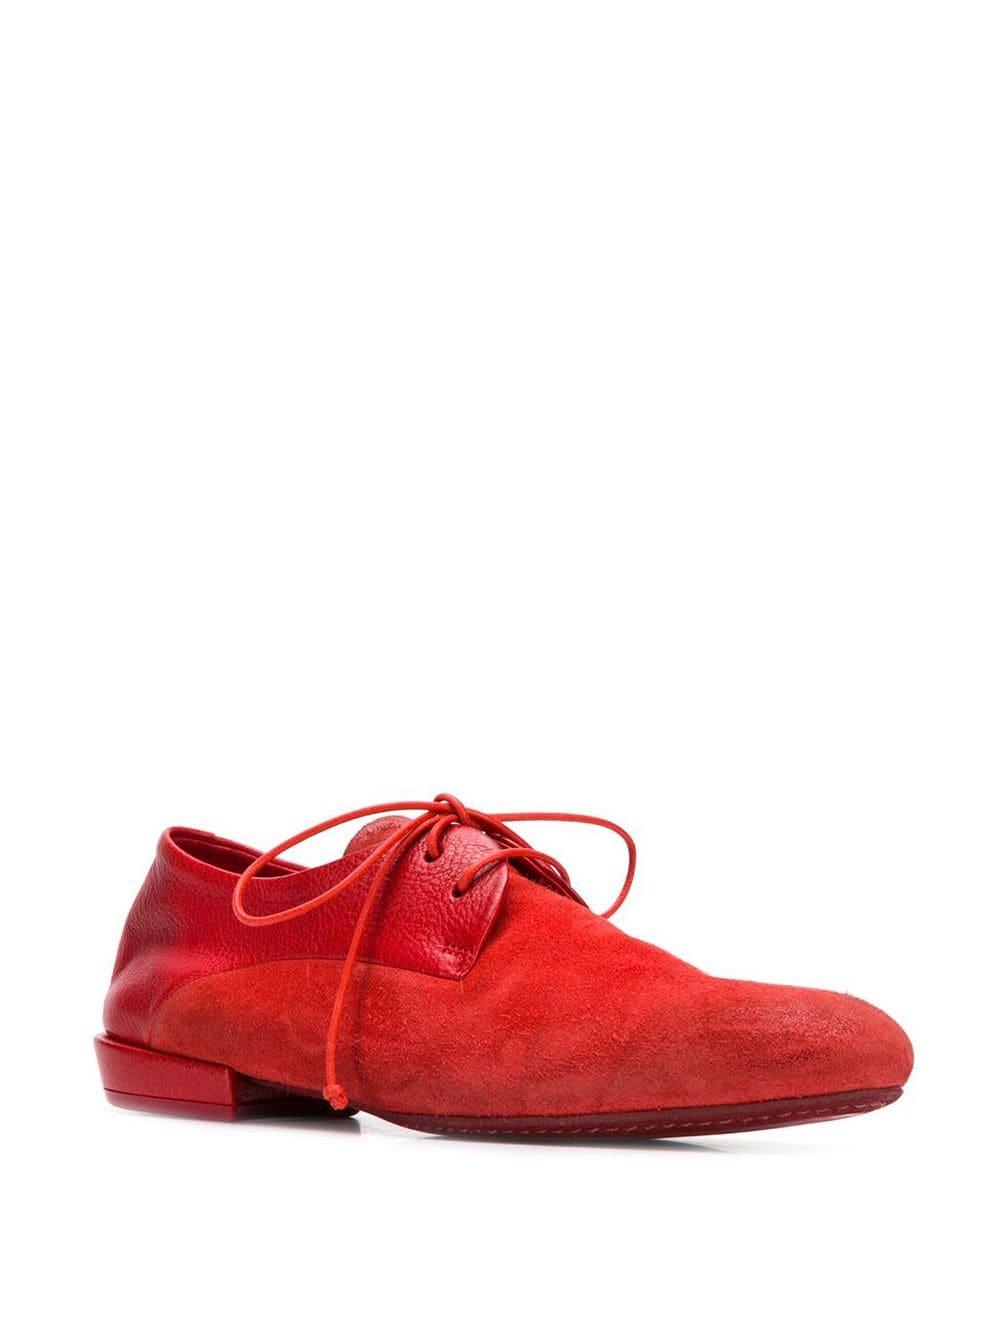 Marsèll Leather Derby Shoes in Red - Lyst